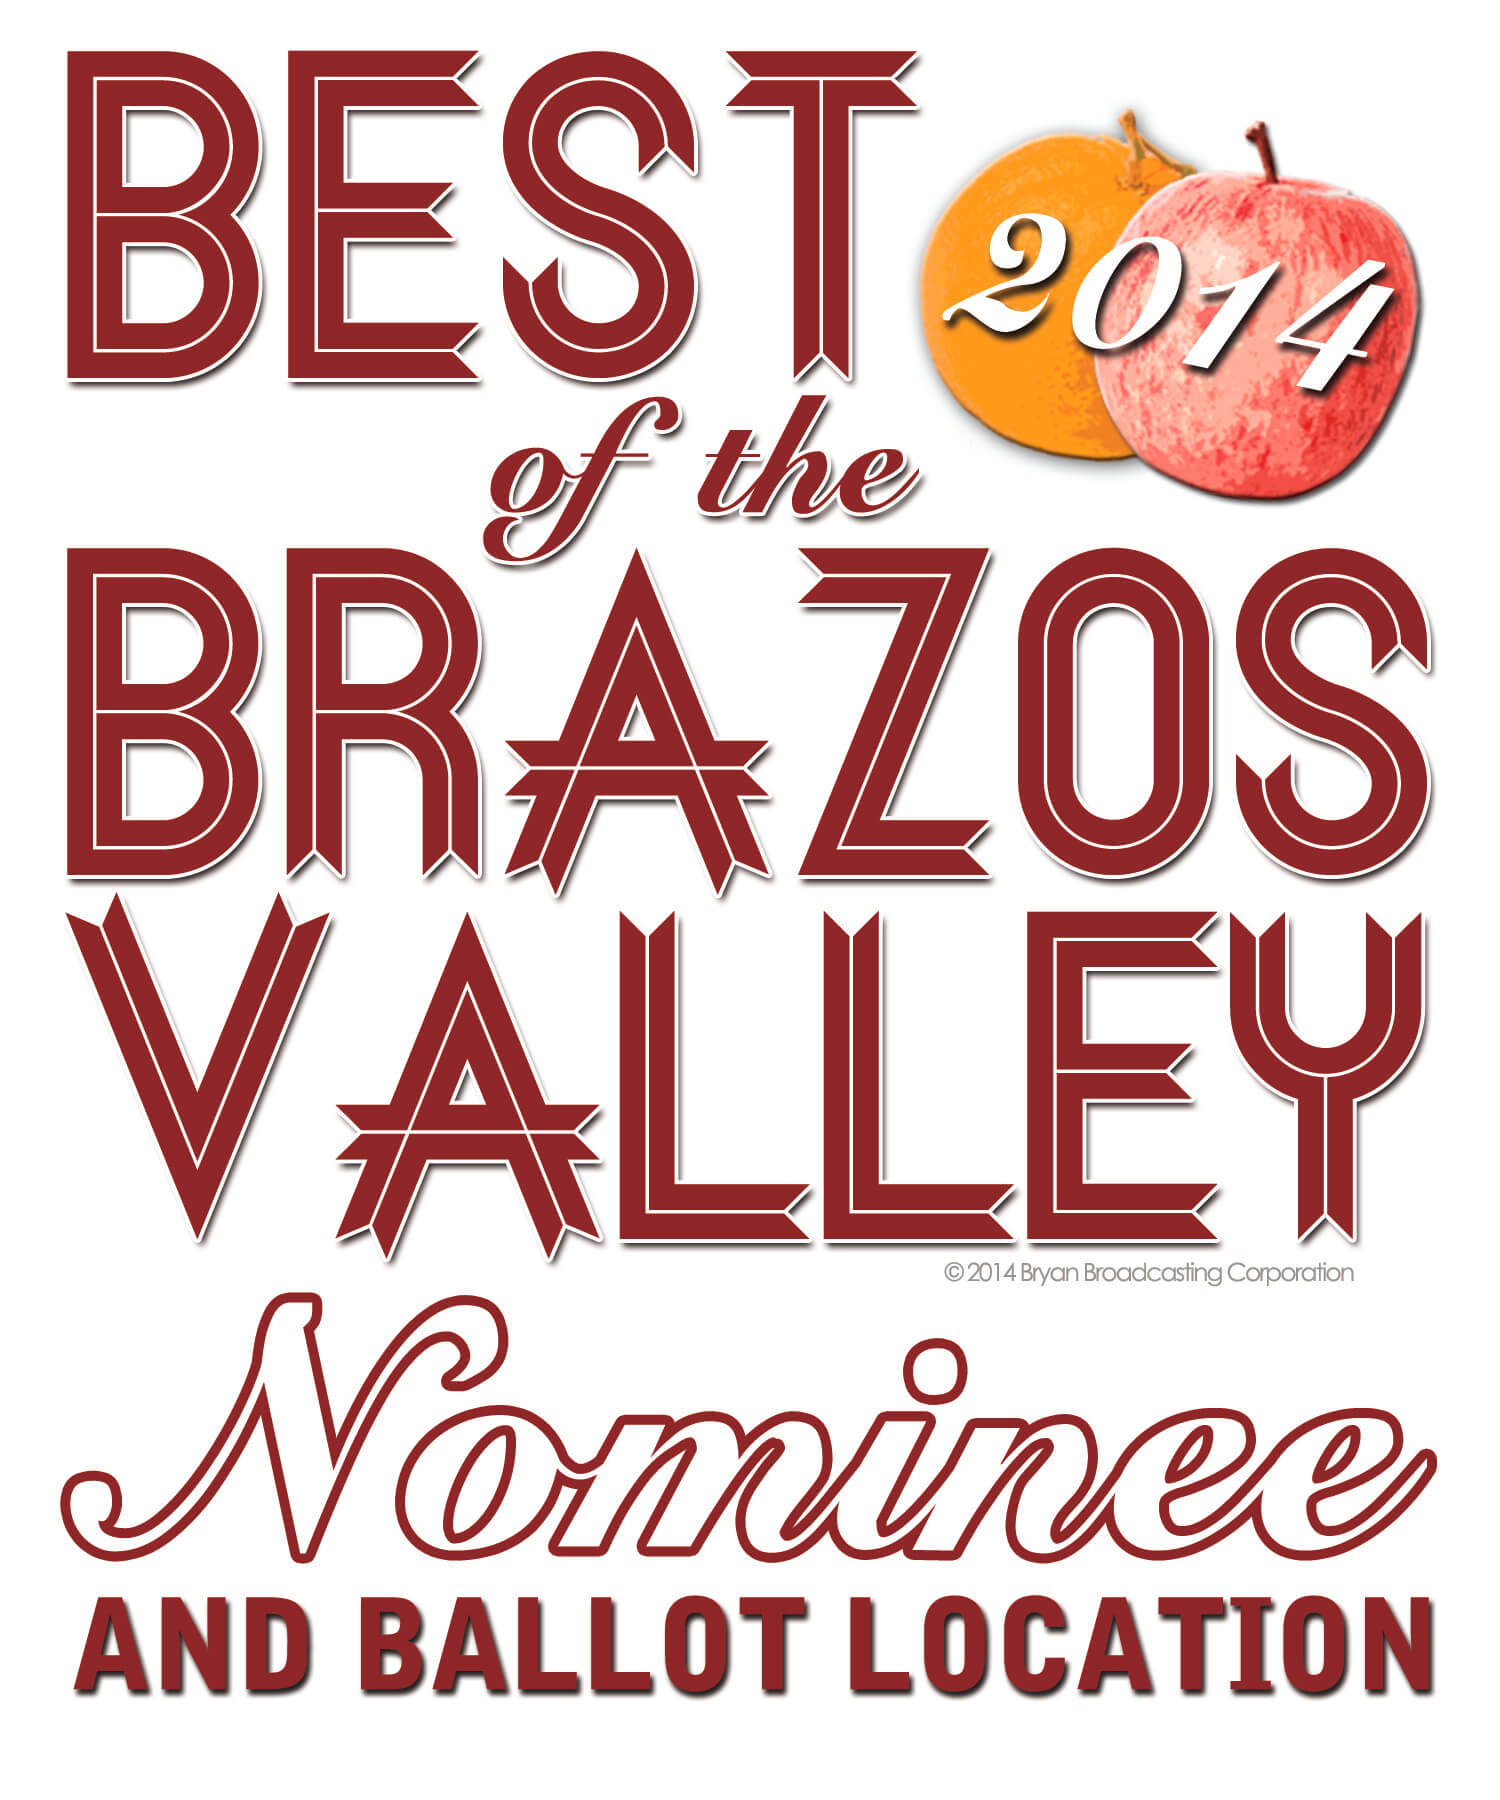 Schulte Roofing nominated Best Roofing Service in the Best of the Brazos Valley